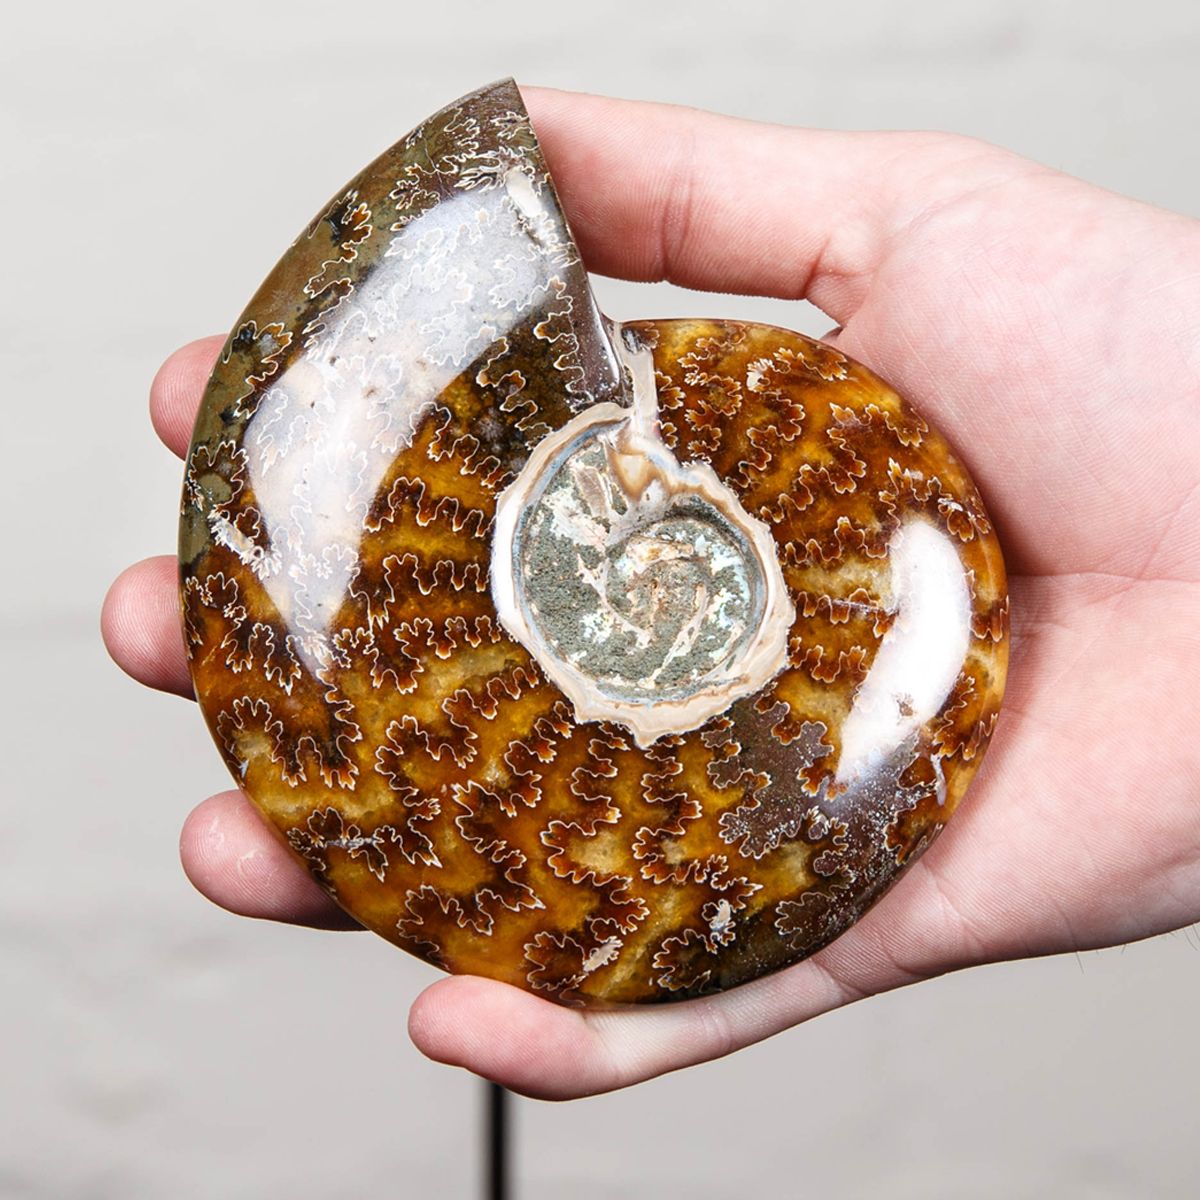 4.5 inch Whole Polished Ammonite Fossil on Stand (Cleoniceras sp)